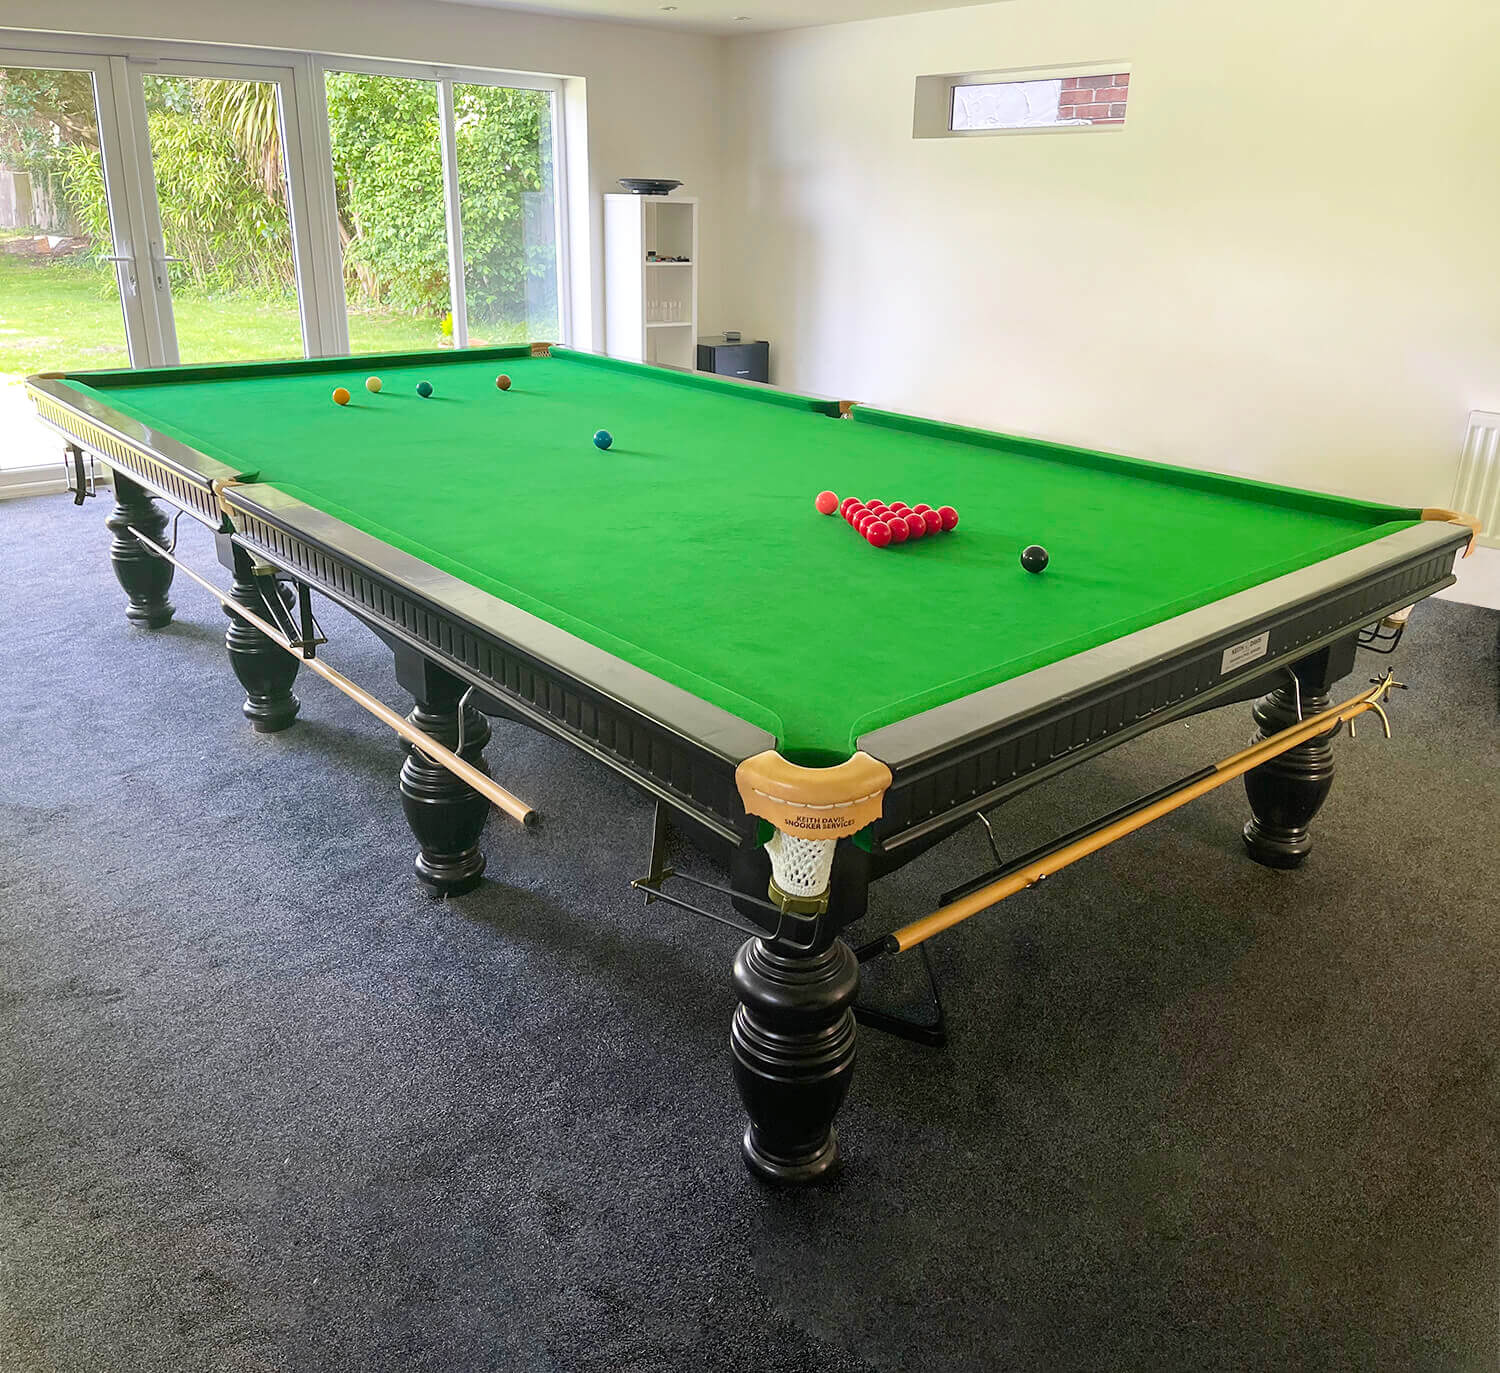 Fully Refurbished Slate Bed Full Size, How Much Does A Full Size Snooker Table Weigh